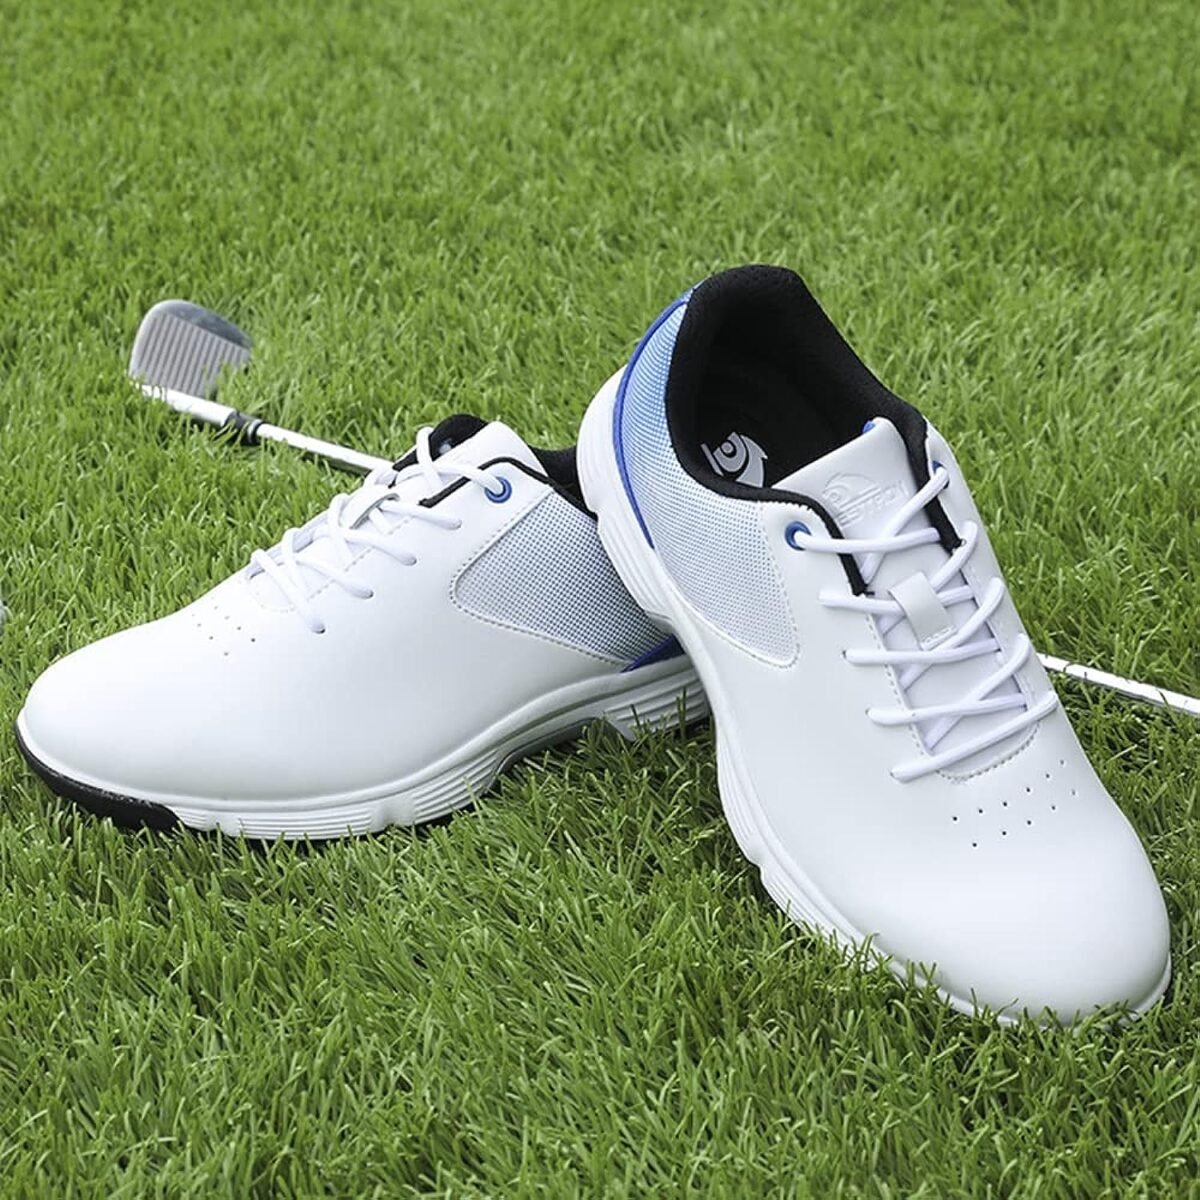 5 Golf Shoes Reviewed & Compared for 2021